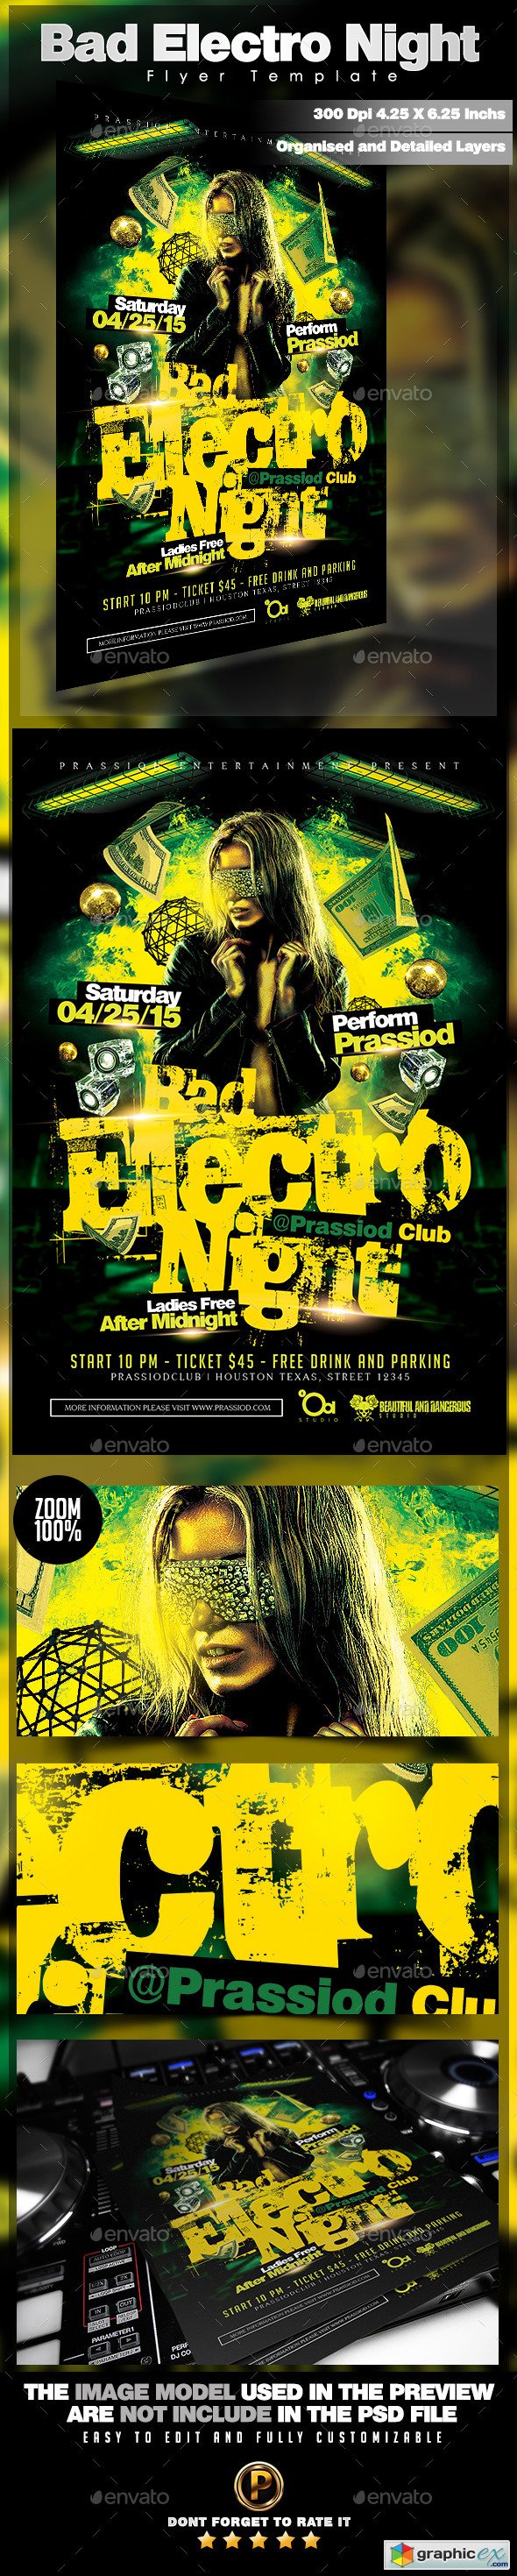  Bad Electro Night Flyer Template